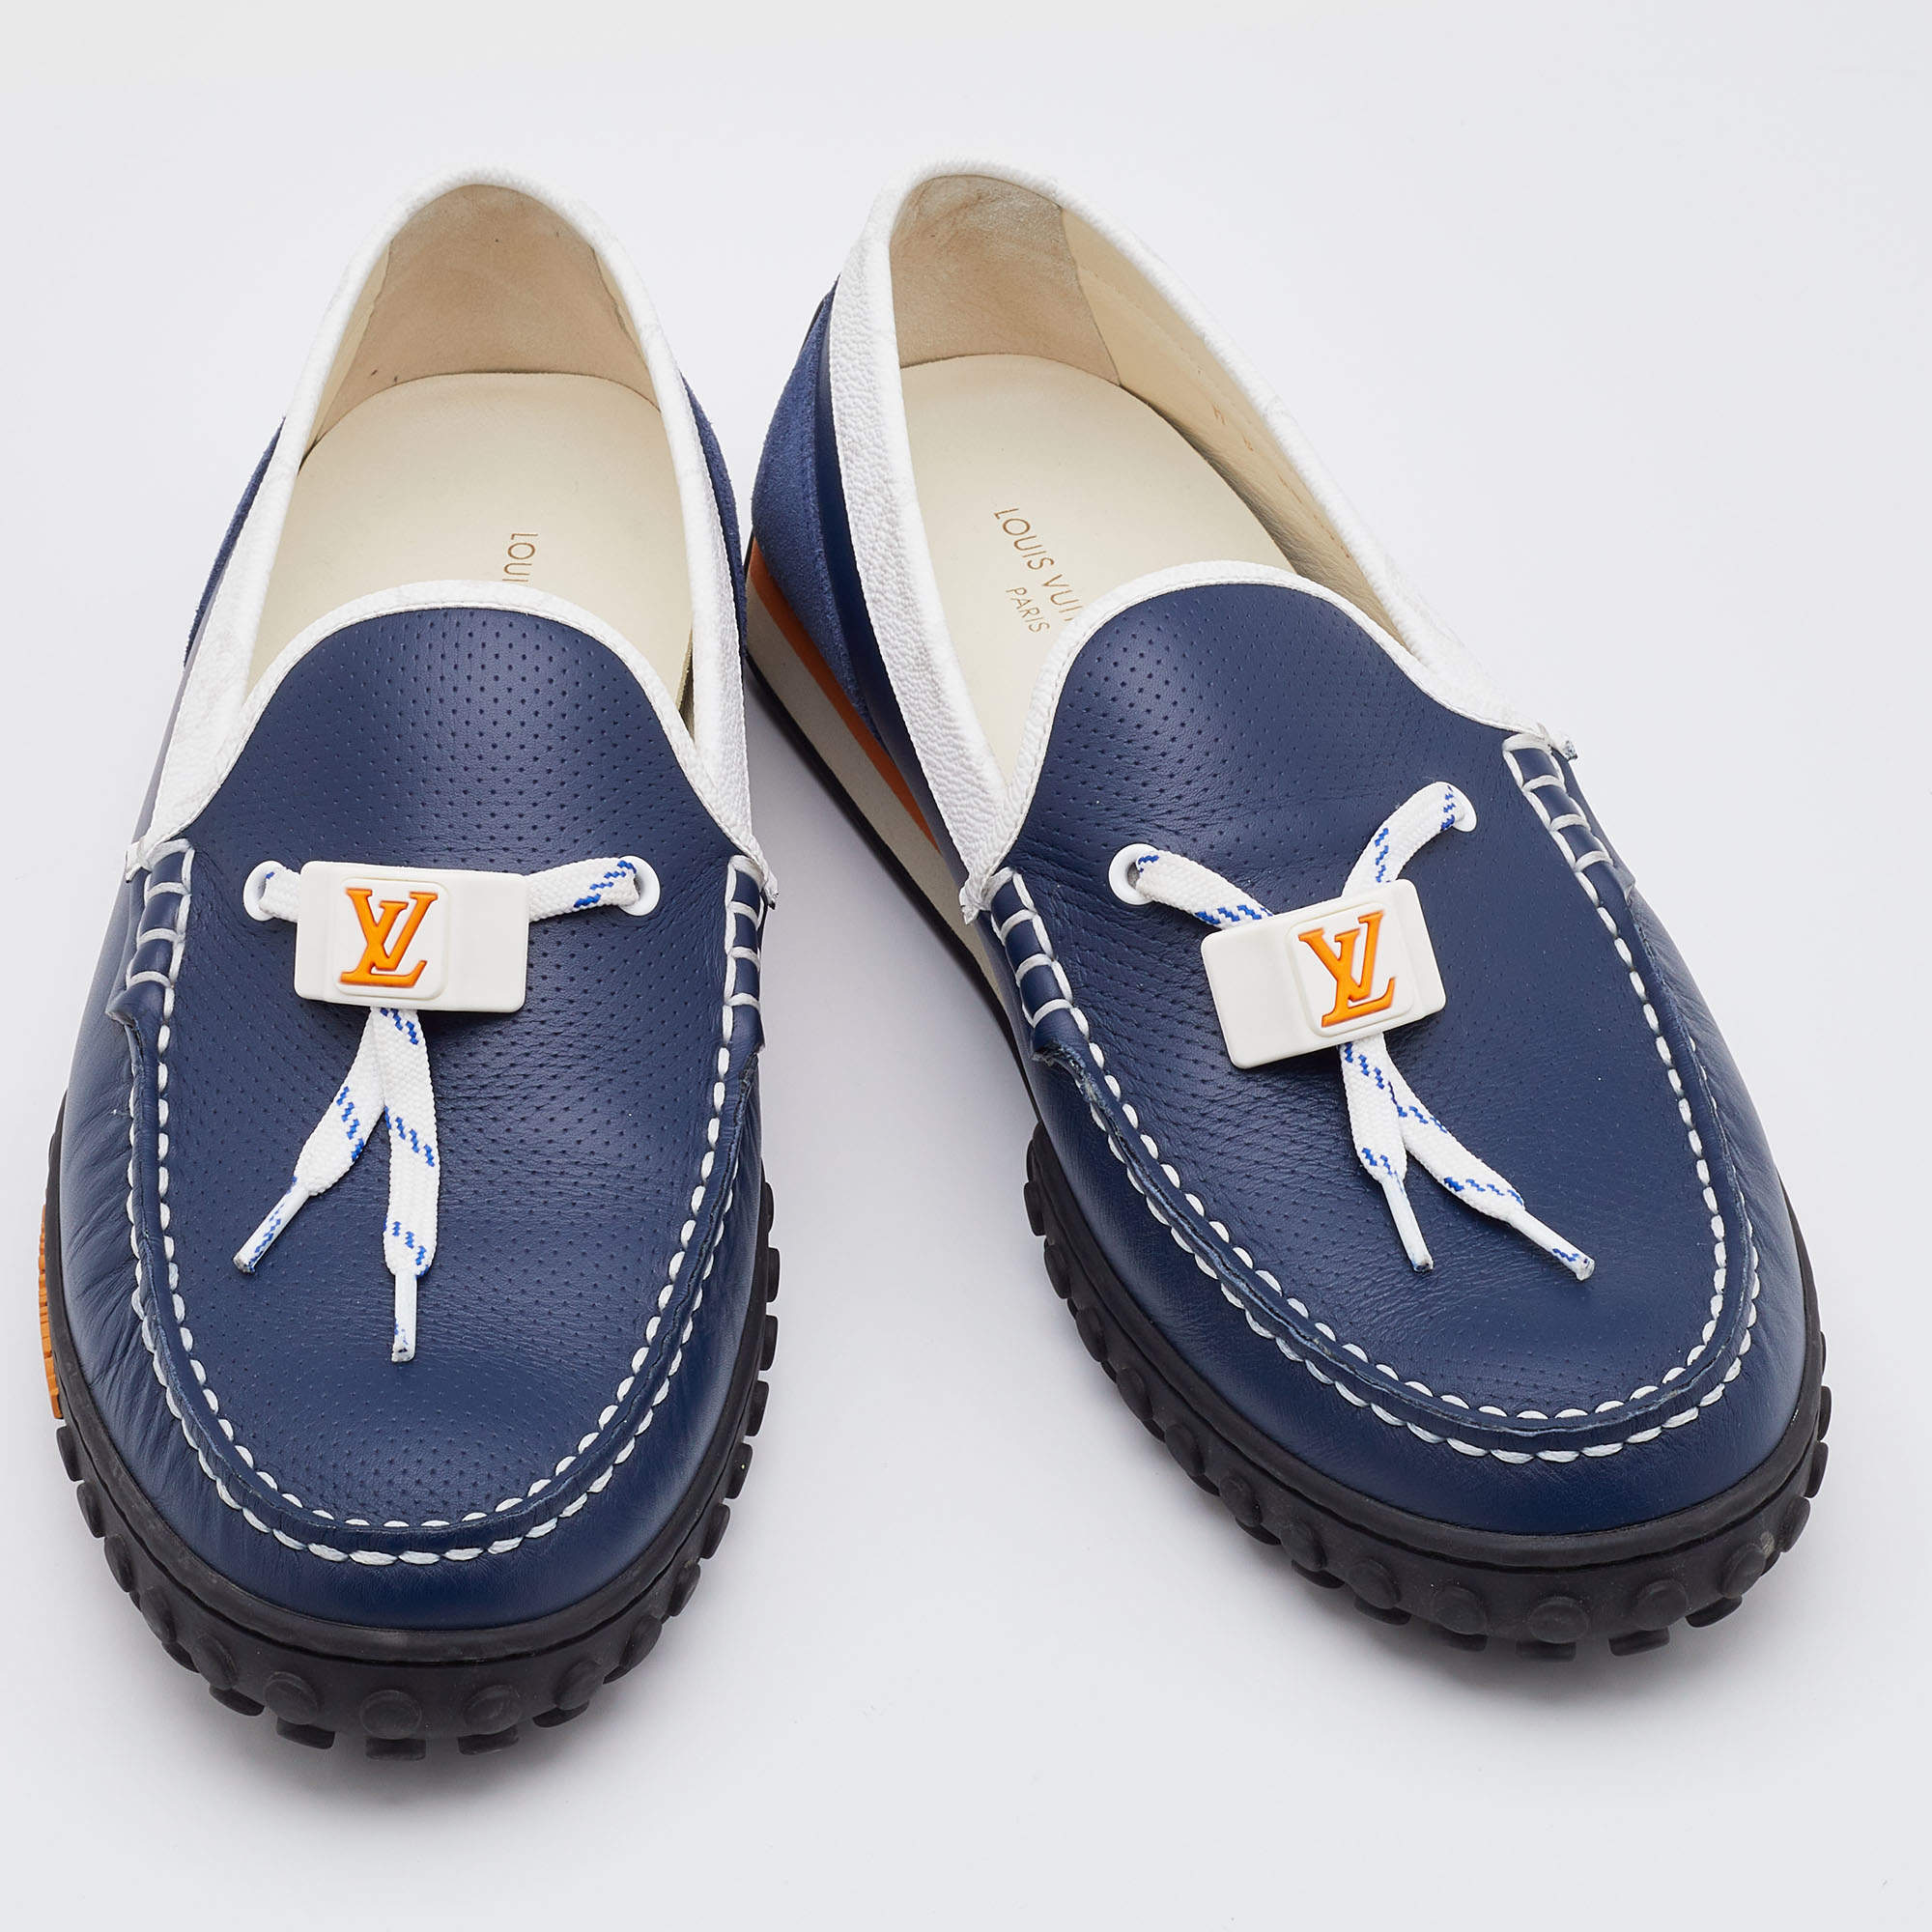 Louis Vuitton Blue/White Suede and Leather Racer Loafers Size 42